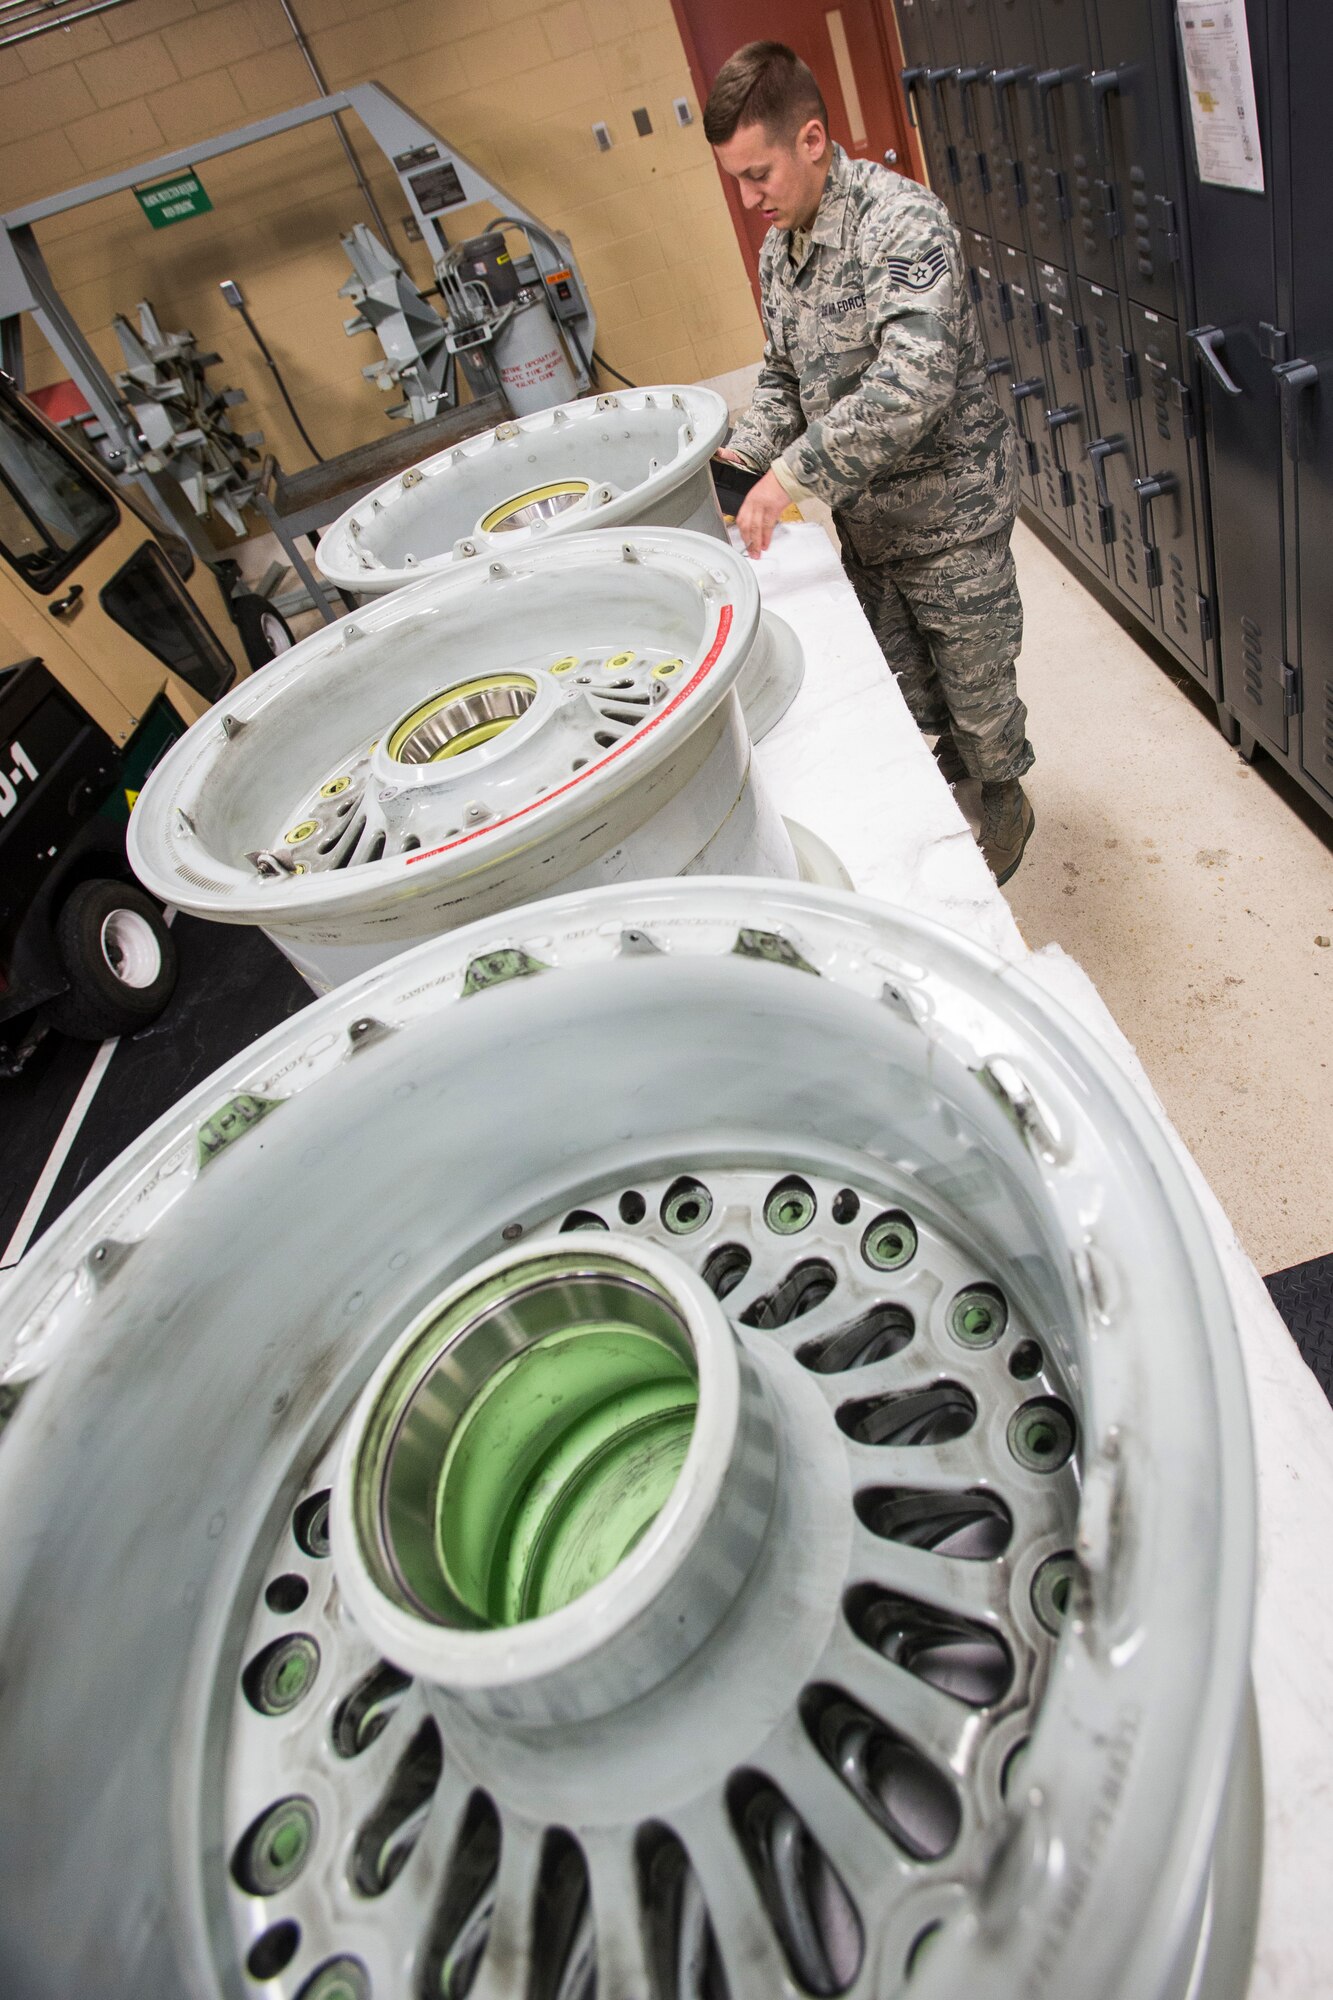 Staff Sgt. Dean C. Schwaner, non-destructive inspection craftsman, 108th Wing, prepares to perform an eddy current inspection on the KC-135R Stratotankers’ nose landing gear wheel rims at Joint Base McGuire-Dix-Lakehurst, N.J., March 7, 2015. The New Jersey Air National Guard NDI Airmen provide support to the structural maintenance program, which ensures that the Stratotankers are mission-ready. (U.S. Air National Guard photo by Master Sgt. Mark C. Olsen/Released)